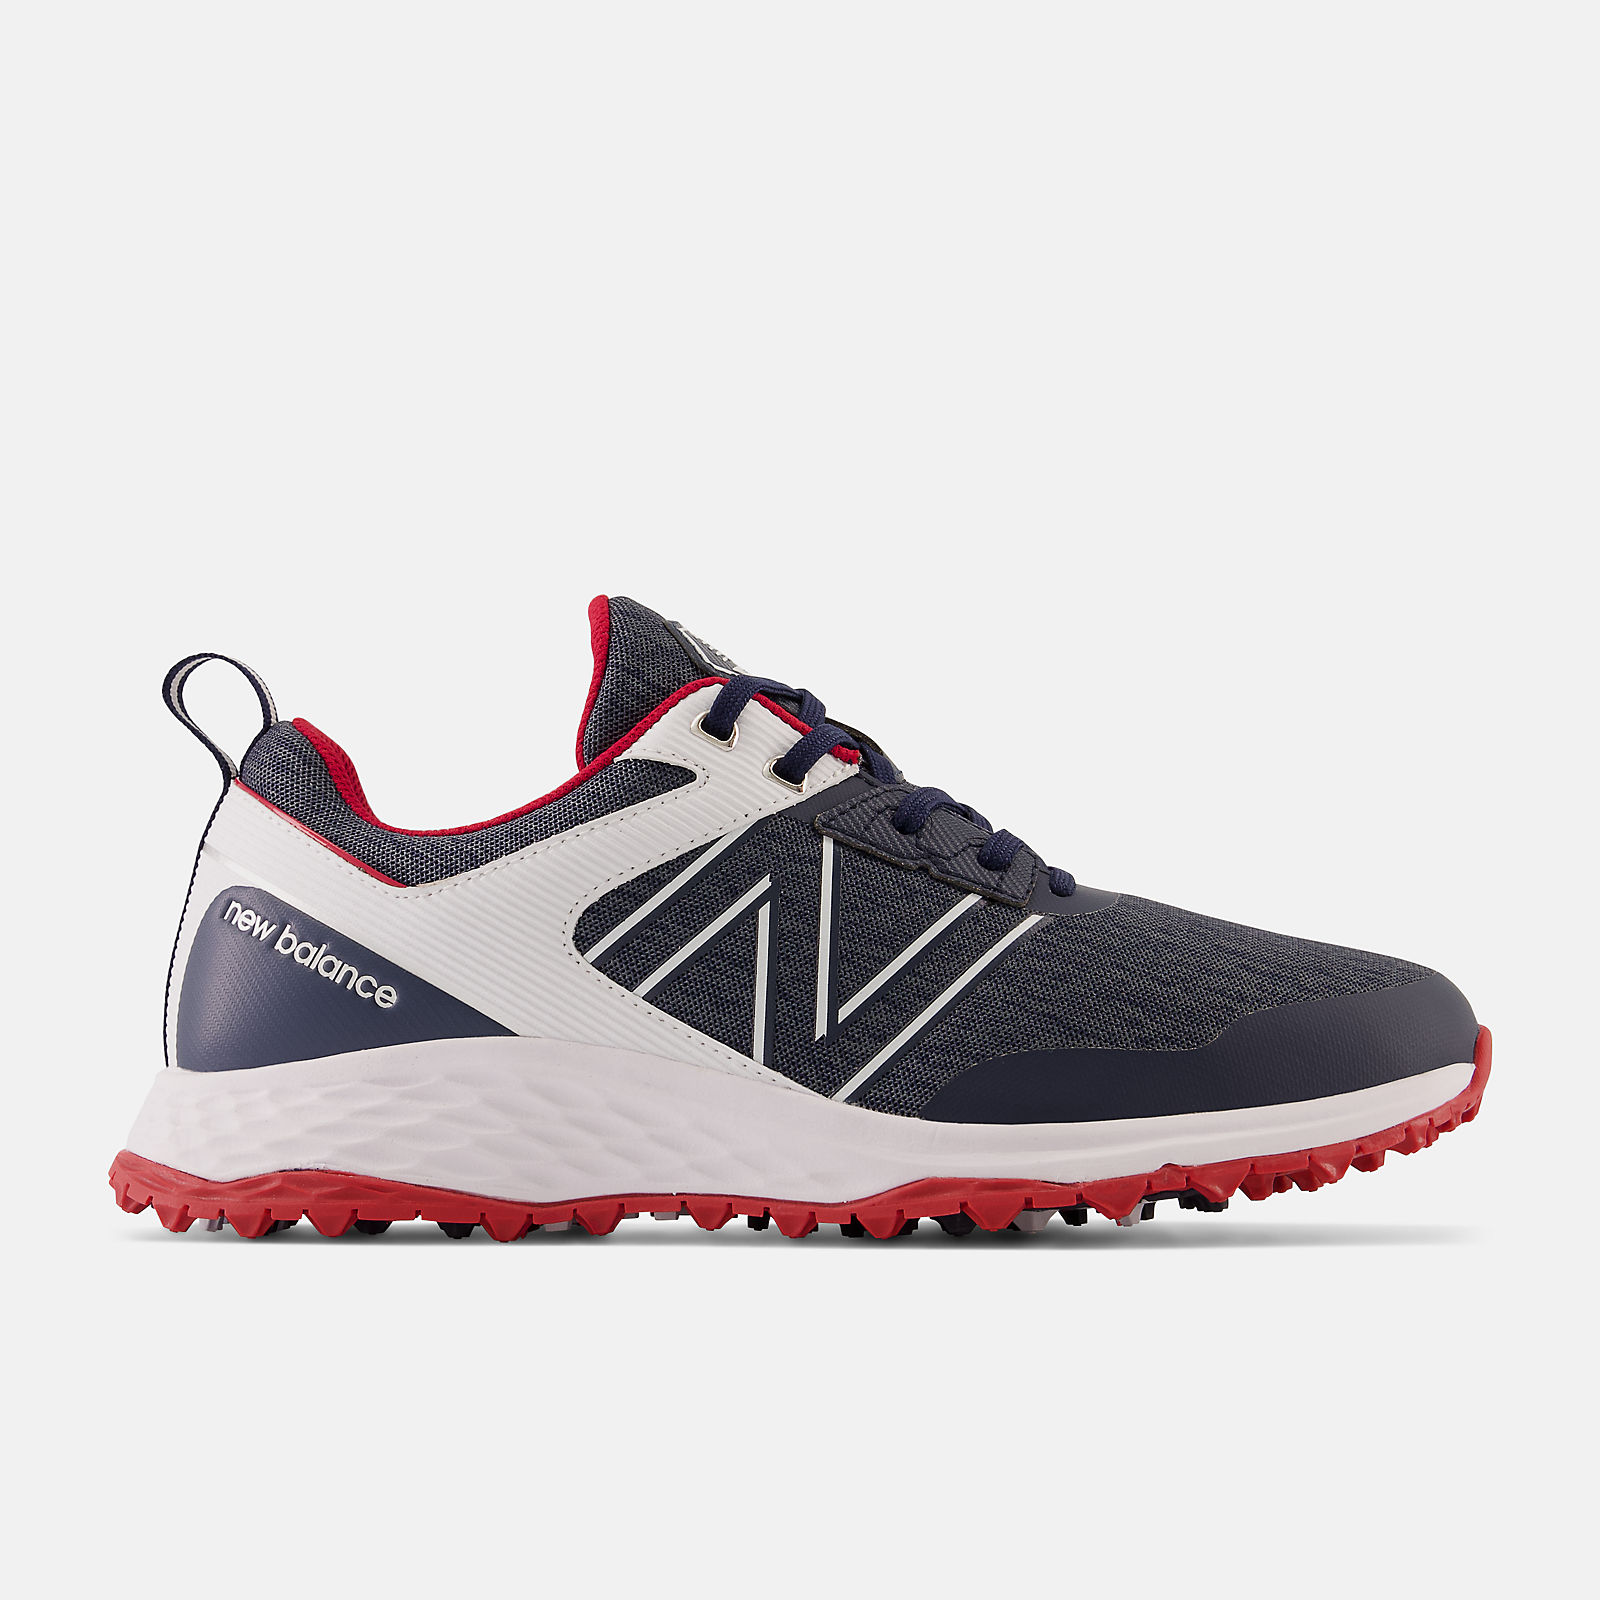 Shocking New Balance Fresh Foam Contend Review - You Wont Believe the Comfort!